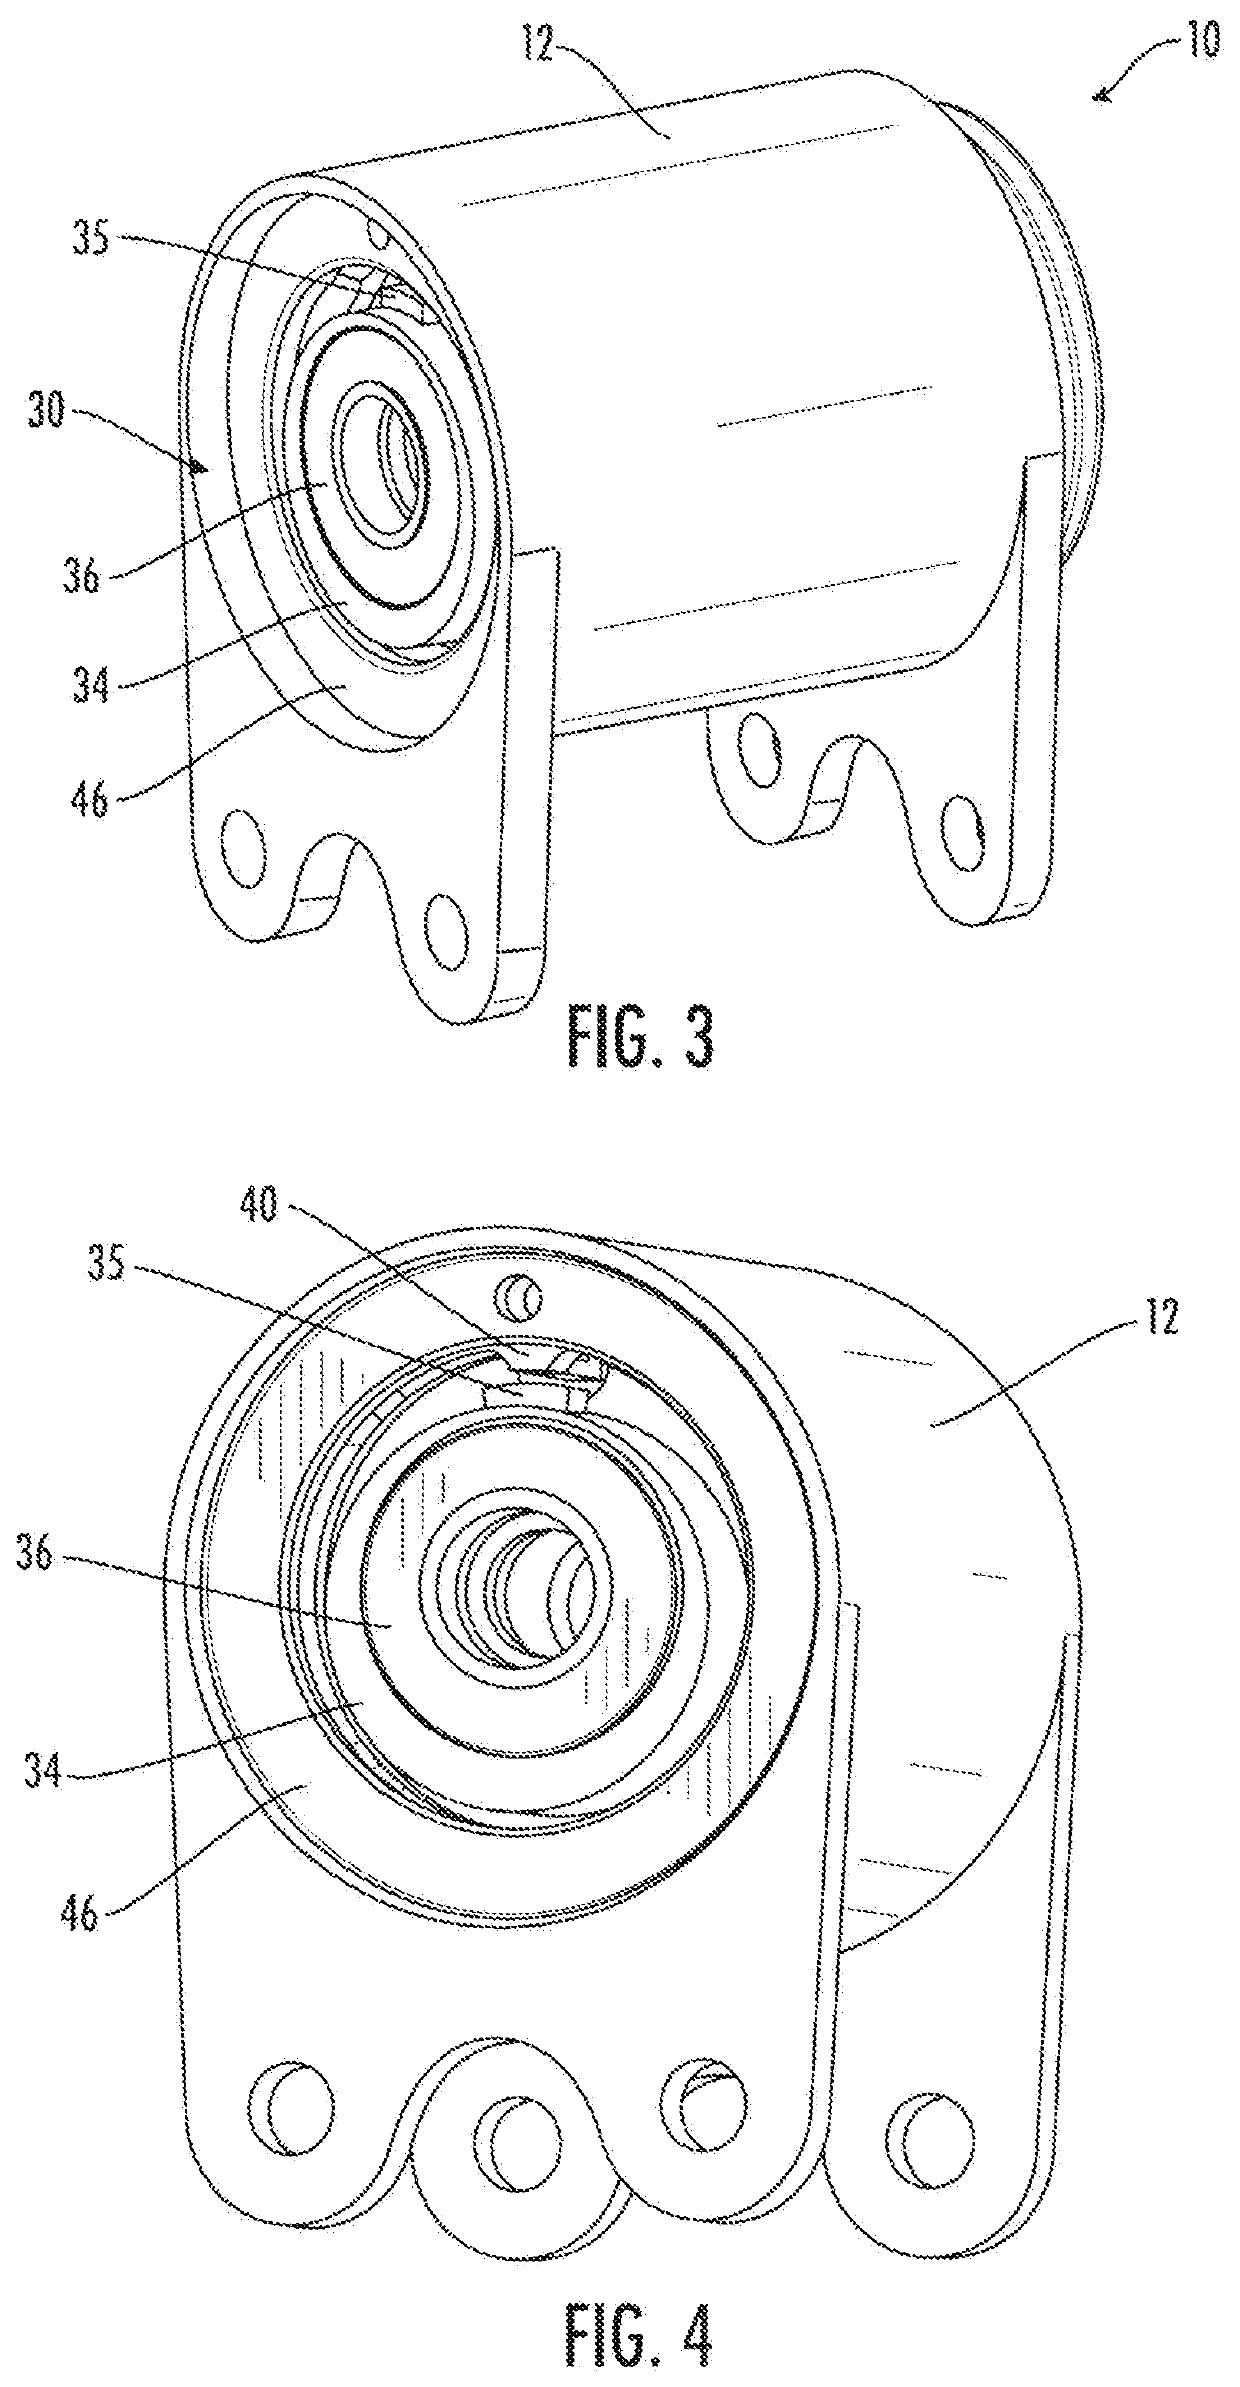 Single-use non-jamming stop module for rotary drive actuator